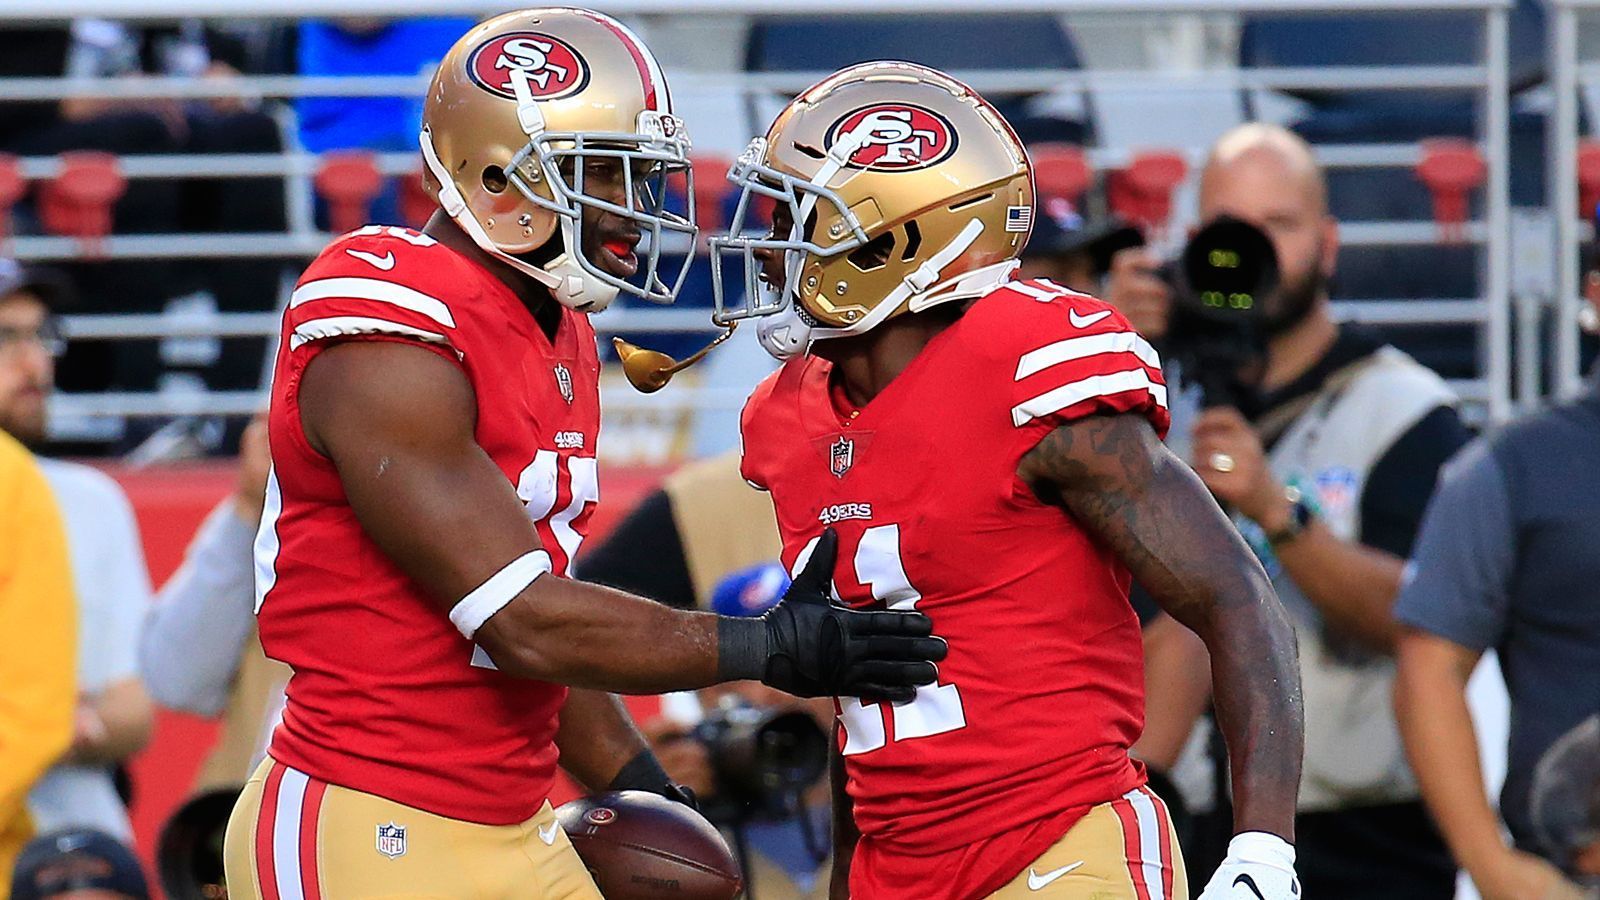 
                <strong>31. Platz: San Francisco 49ers</strong><br>
                Pierre Garcon und Marquise Goodwin&#x2022; 625 Yards <br>&#x2022; 41 Receptions <br>&#x2022; 5 Touchdowns <br>
              